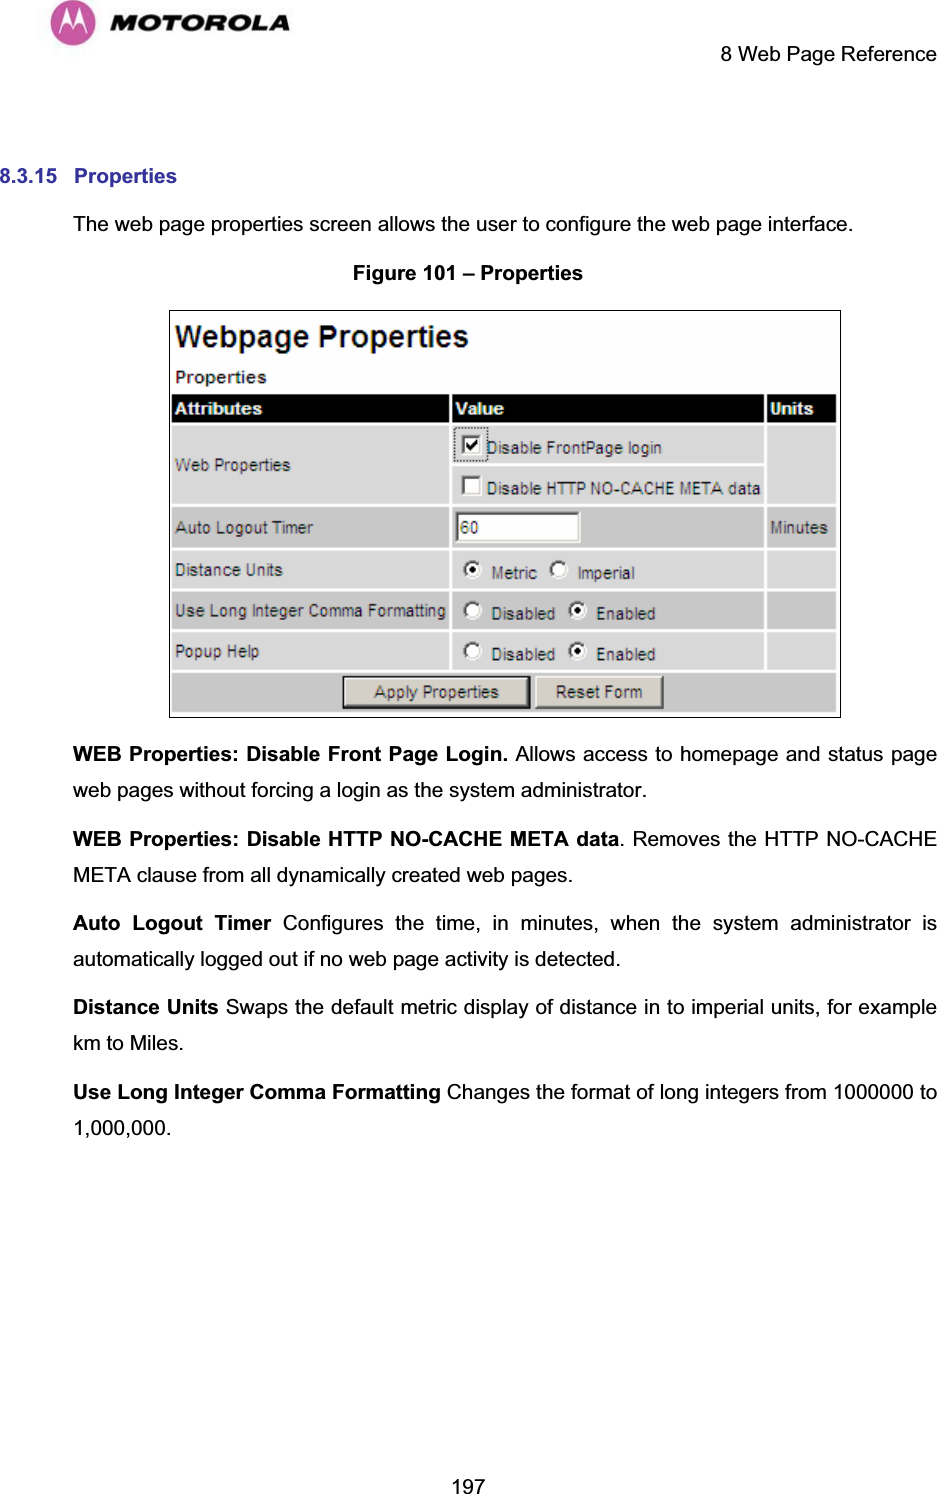     8 Web Page Reference  197 8.3.15 Properties The web page properties screen allows the user to configure the web page interface. Figure 101 – Properties  WEB Properties: Disable Front Page Login. Allows access to homepage and status page web pages without forcing a login as the system administrator. WEB Properties: Disable HTTP NO-CACHE META data. Removes the HTTP NO-CACHE META clause from all dynamically created web pages. Auto Logout Timer Configures the time, in minutes, when the system administrator is automatically logged out if no web page activity is detected. Distance Units Swaps the default metric display of distance in to imperial units, for example km to Miles. Use Long Integer Comma Formatting Changes the format of long integers from 1000000 to 1,000,000.  